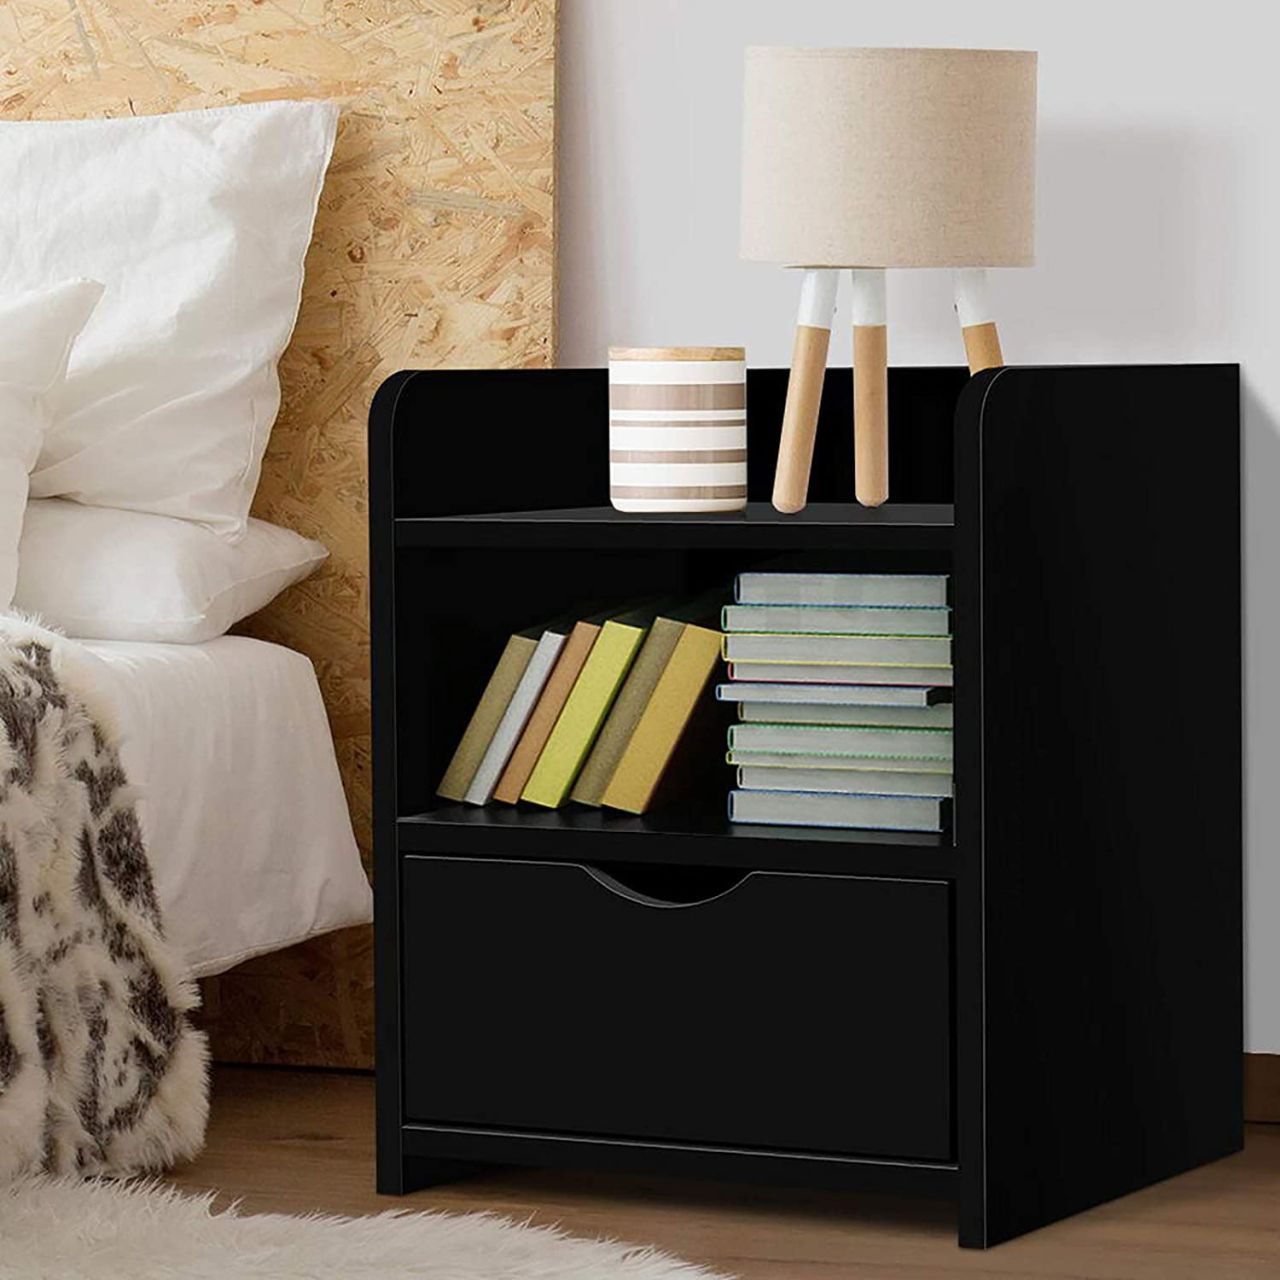 These Affordable Bedside Tables Will Look Better Than That Dusty Stack of Books